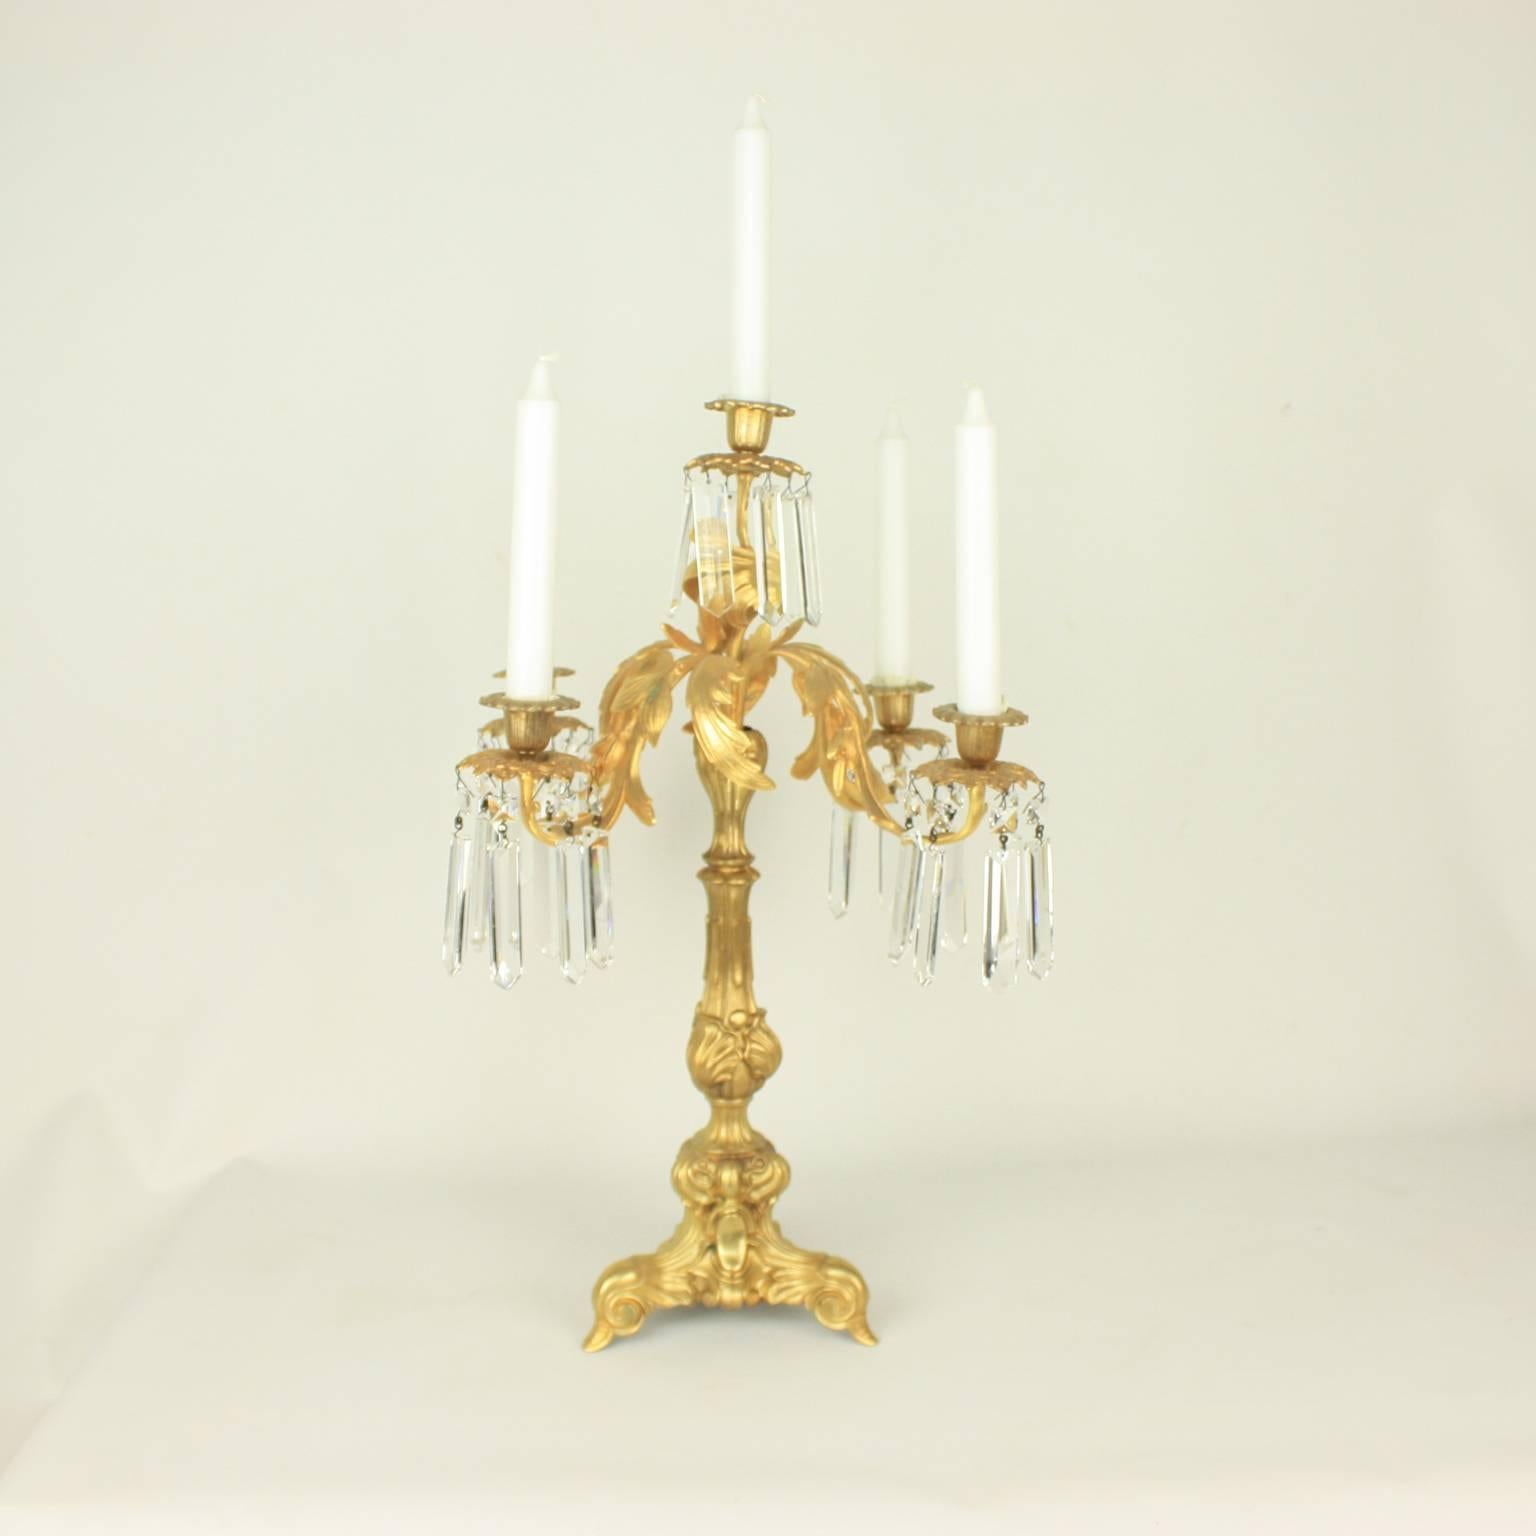 Pair of elegant Neo-Rococo Style gilt bronze candelabras with five arms in the shape of sprays of leaves, issuing from an acanthus wrapped baluster stem hung with crystal-cut prism, resting on a triform base.